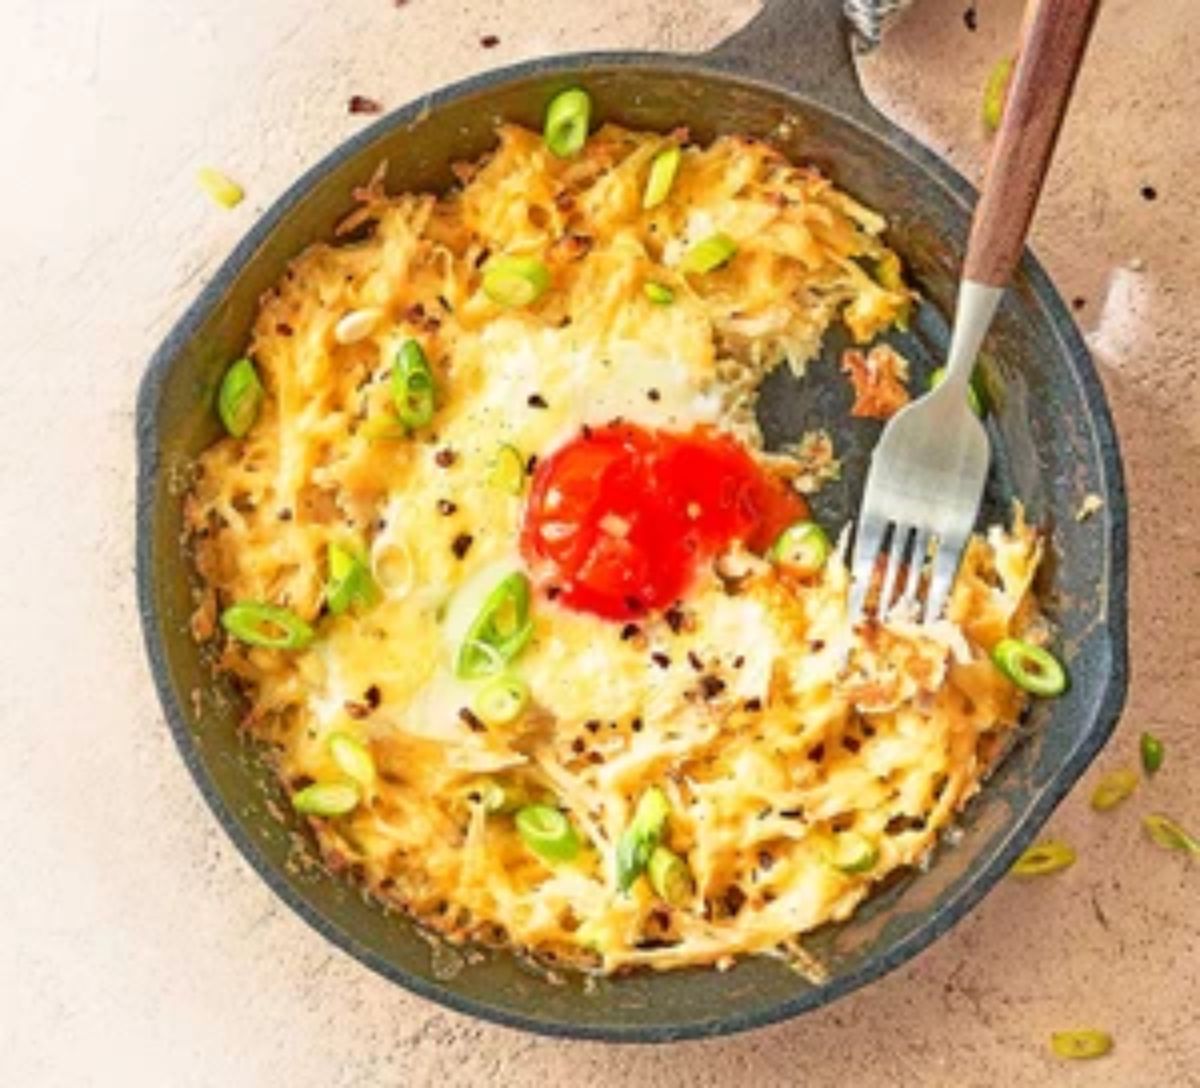 Skillet hash browns and eggs with a fork.